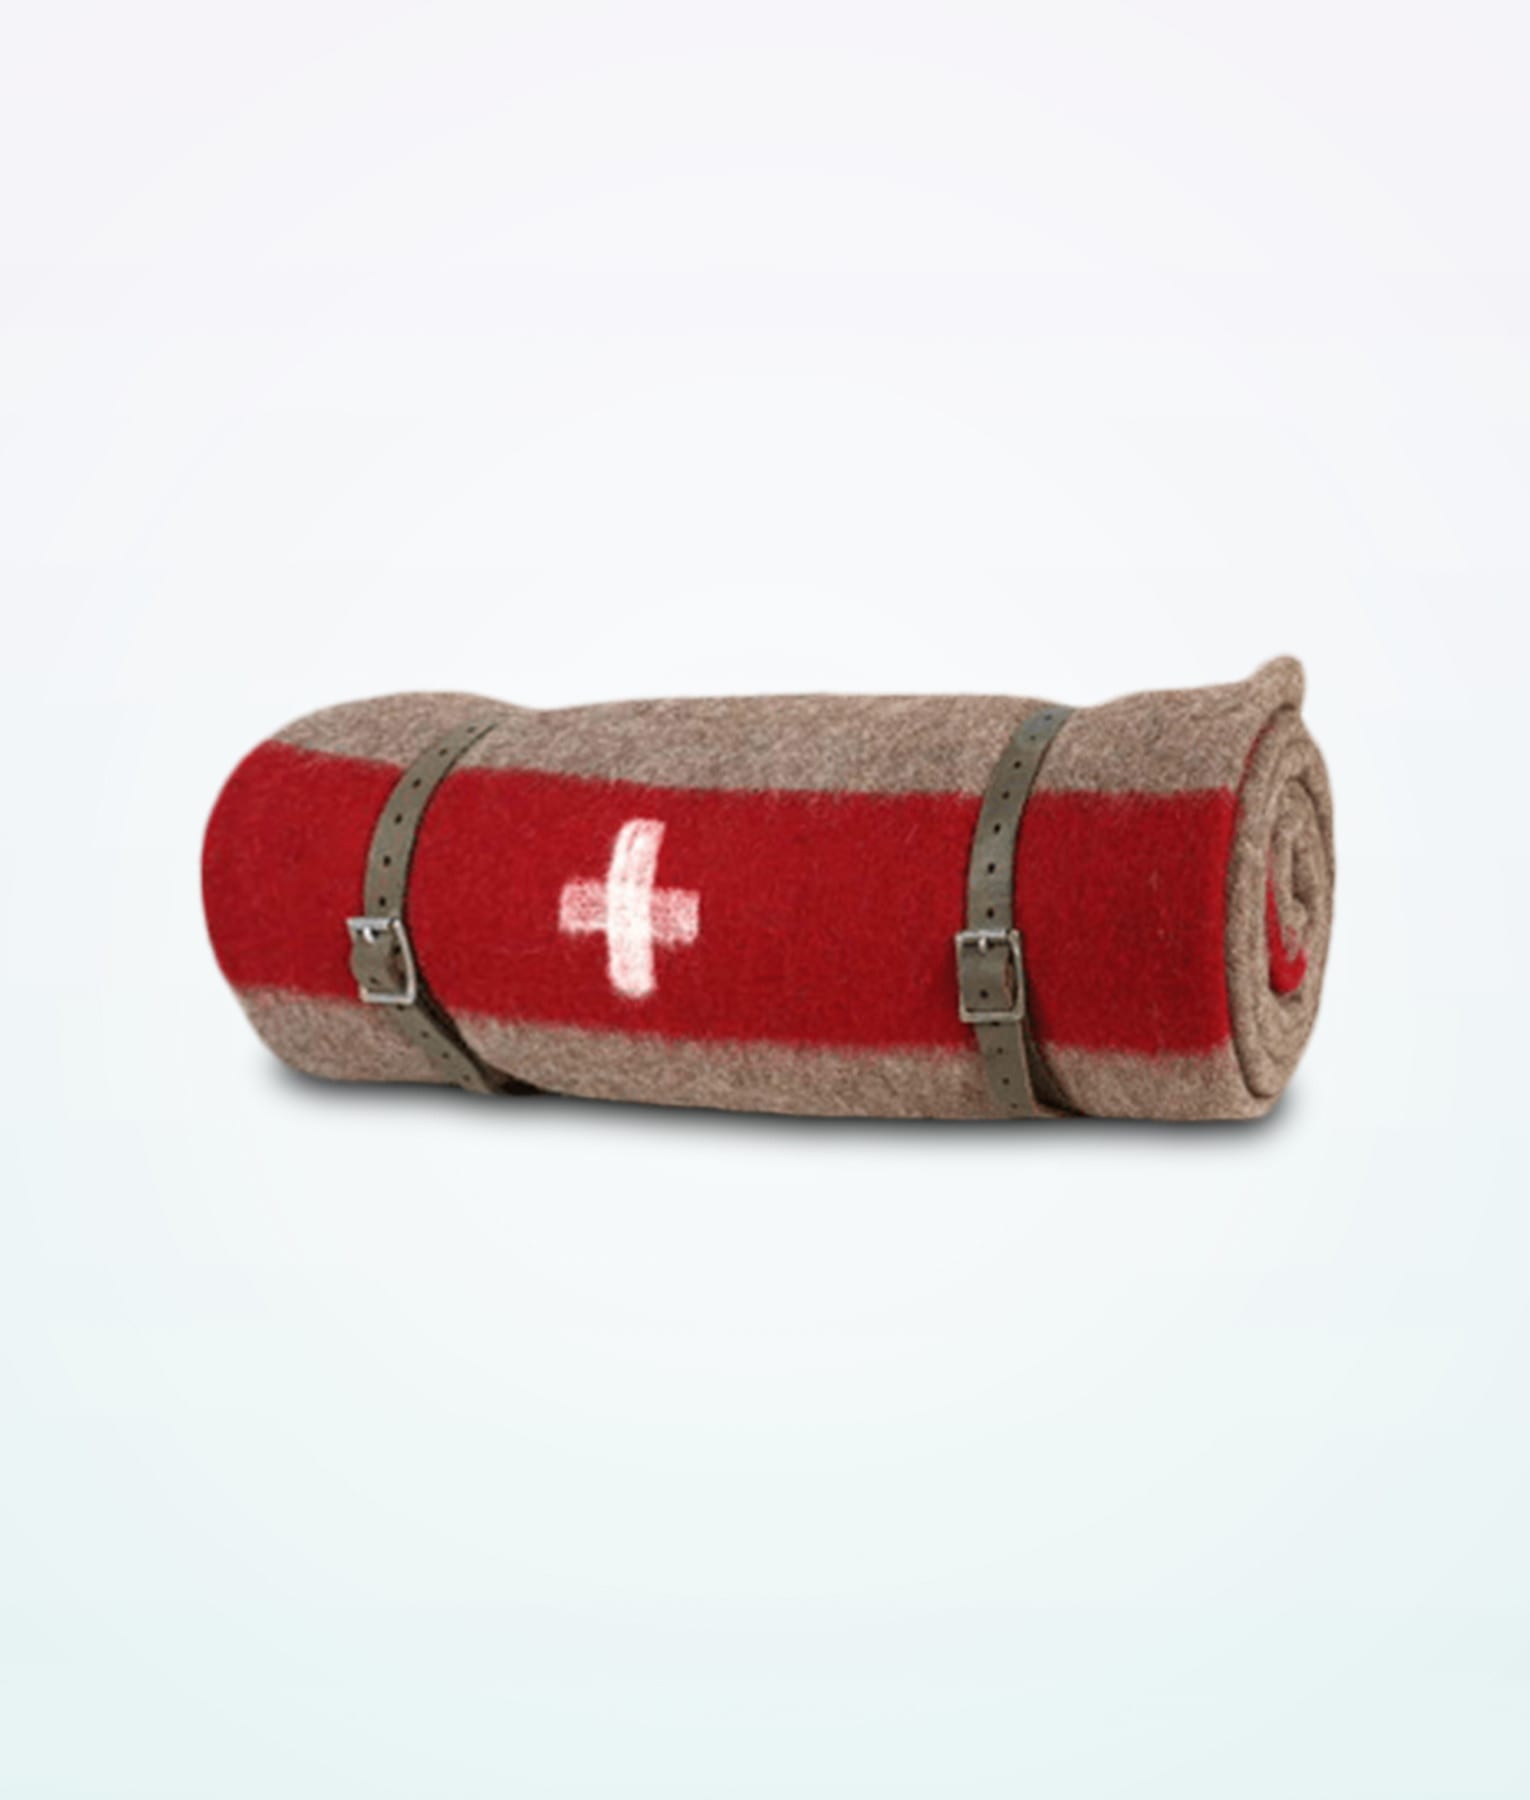 Autumn Camping Magic: Swiss Camping Equipment, ArmyBlanket - Swiss Made Direct - camping suisse, équipement de camping suisse, camping d'automne, couverture militaire suisse, équipement de camping